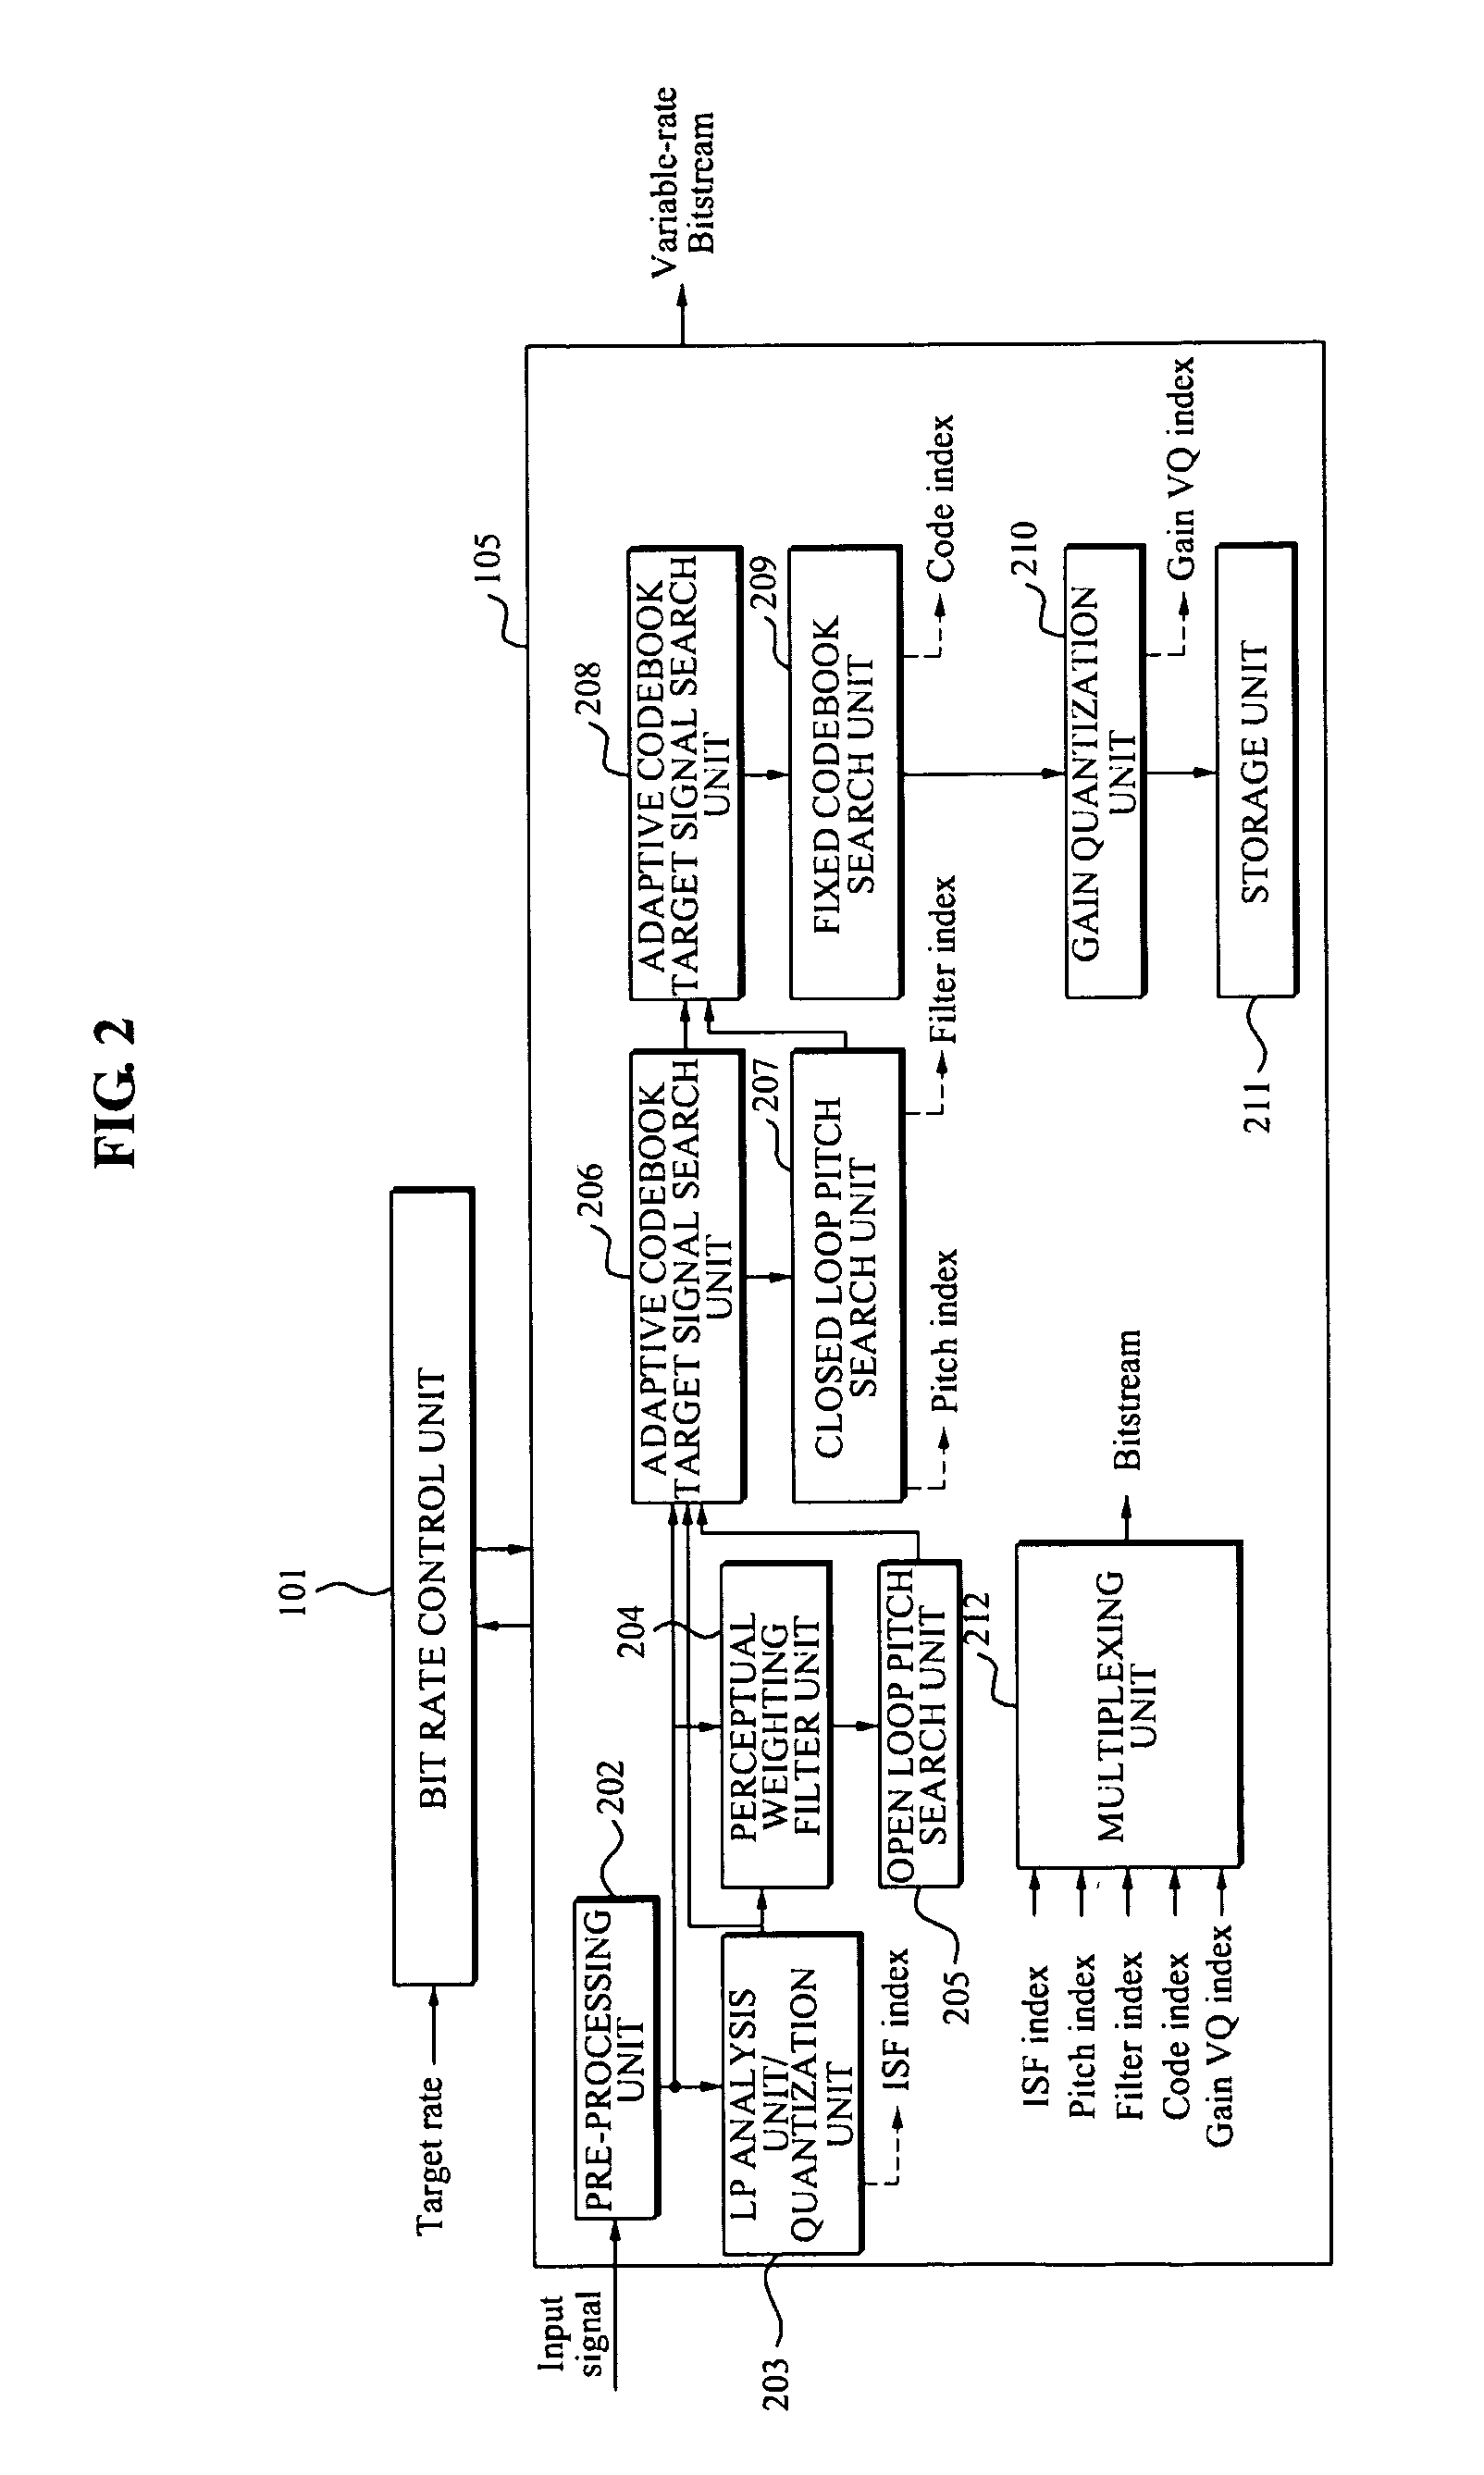 Method and apparatus for encoding/decoding speech signal